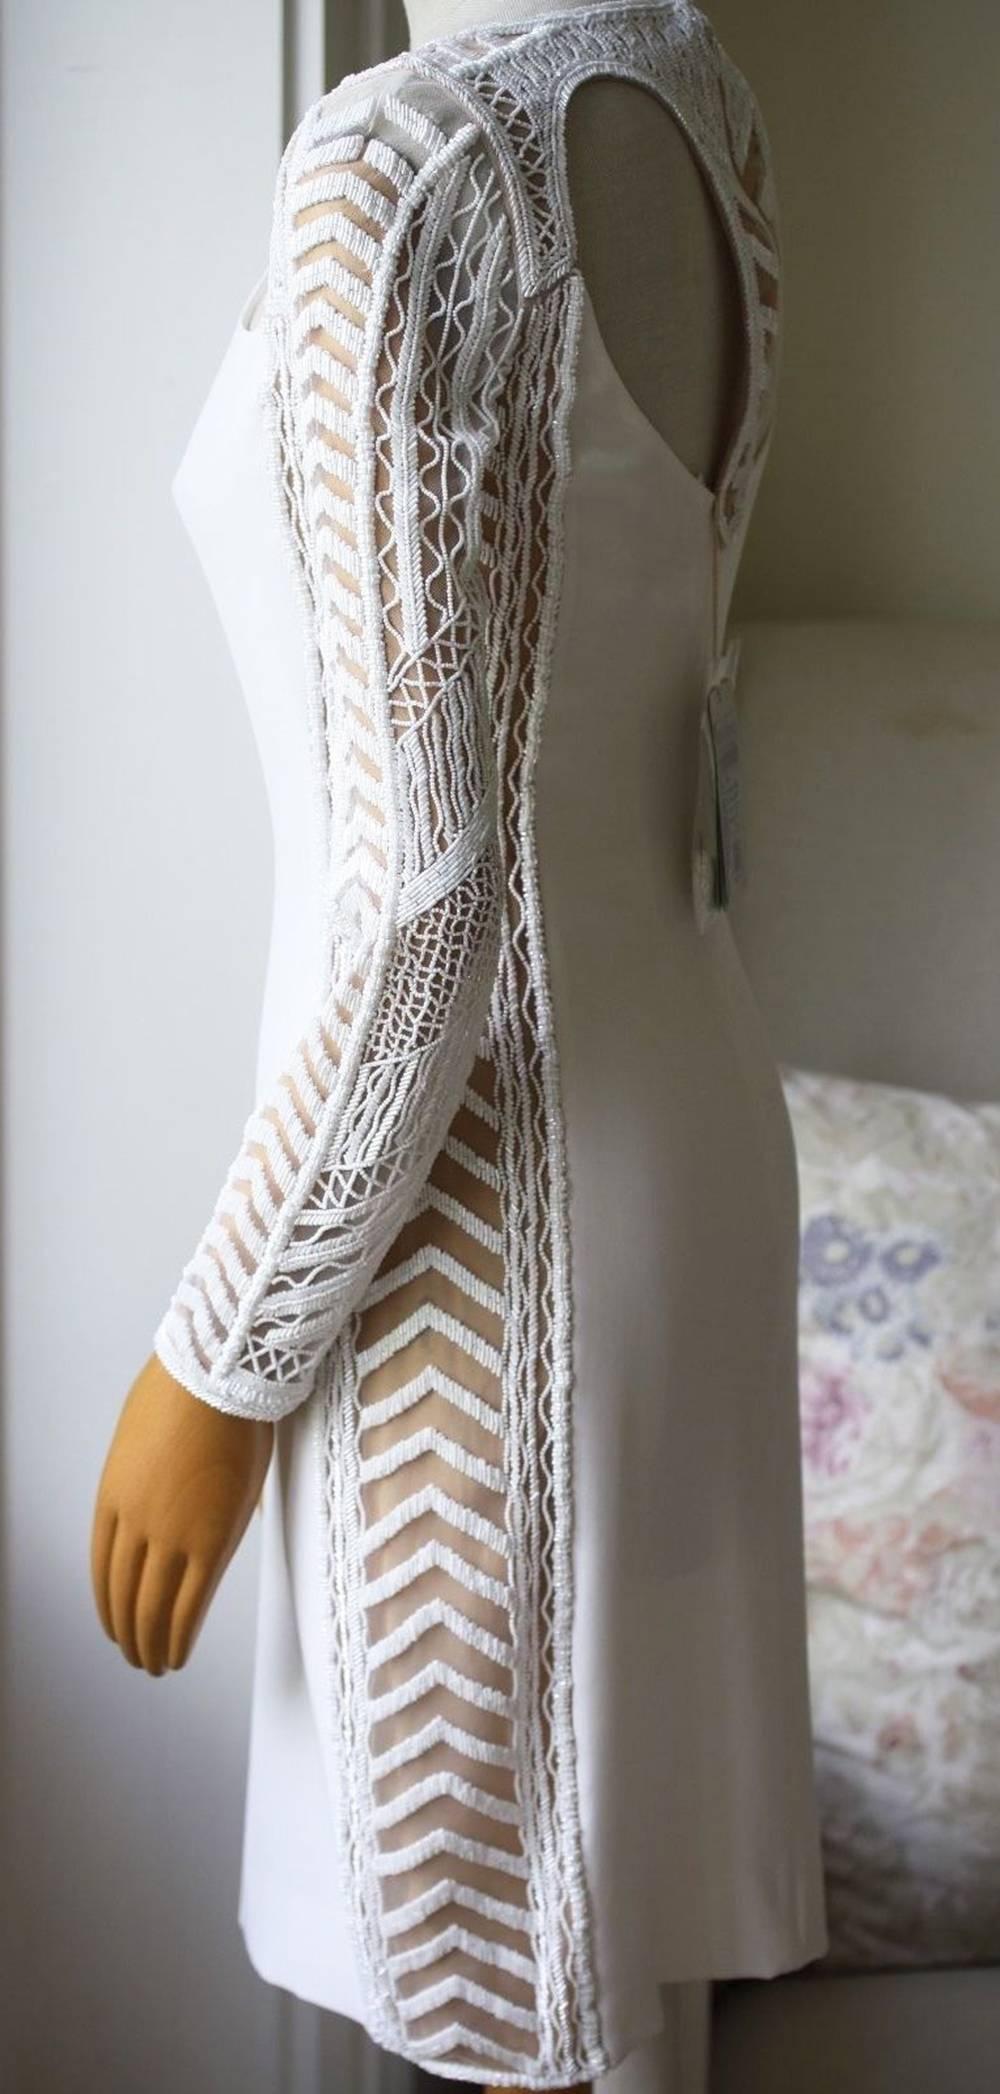 Striking Emilio Pucci dress with ivory bugle beaded pattern and an elegant cutout back and concealed zip fastening

Size: IT 38 (UK 6, US 2, FR 34)

Condition: New with tags.